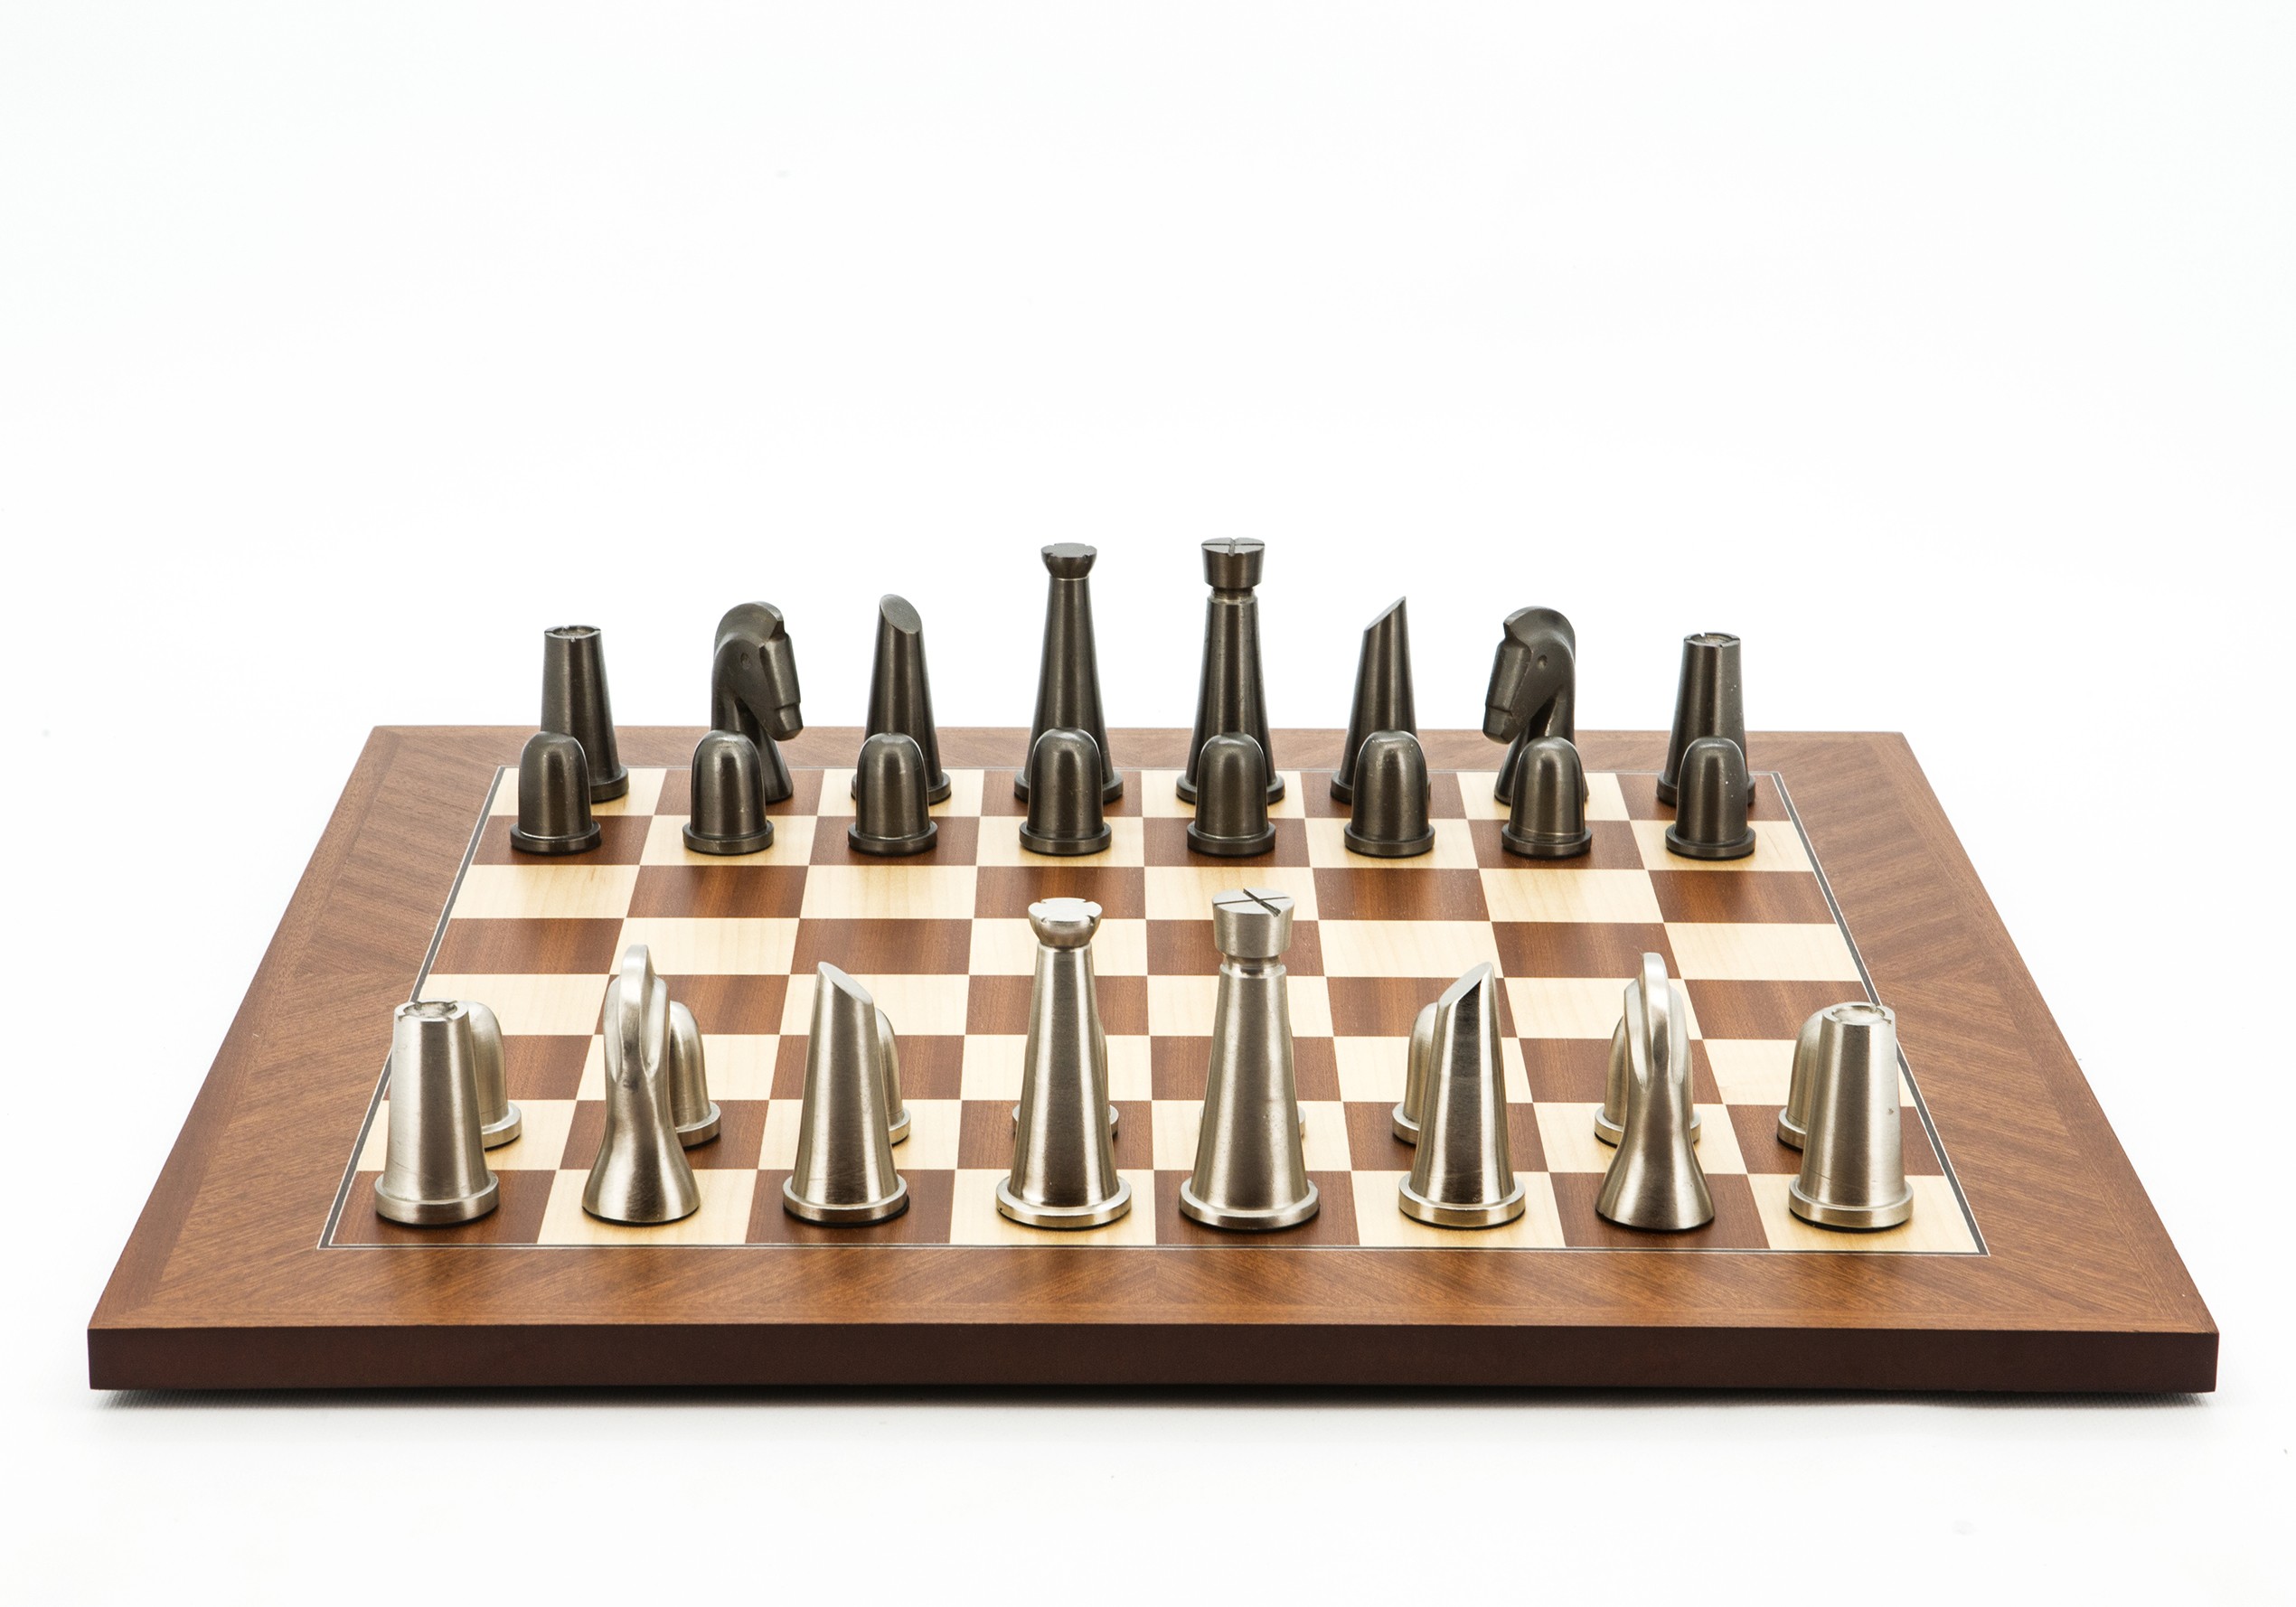 Dal Rossi Italy Chess Set Mahogany Maple Flat Board 50cm, With Metal Dark Titanium and Silver chessmen 85mm